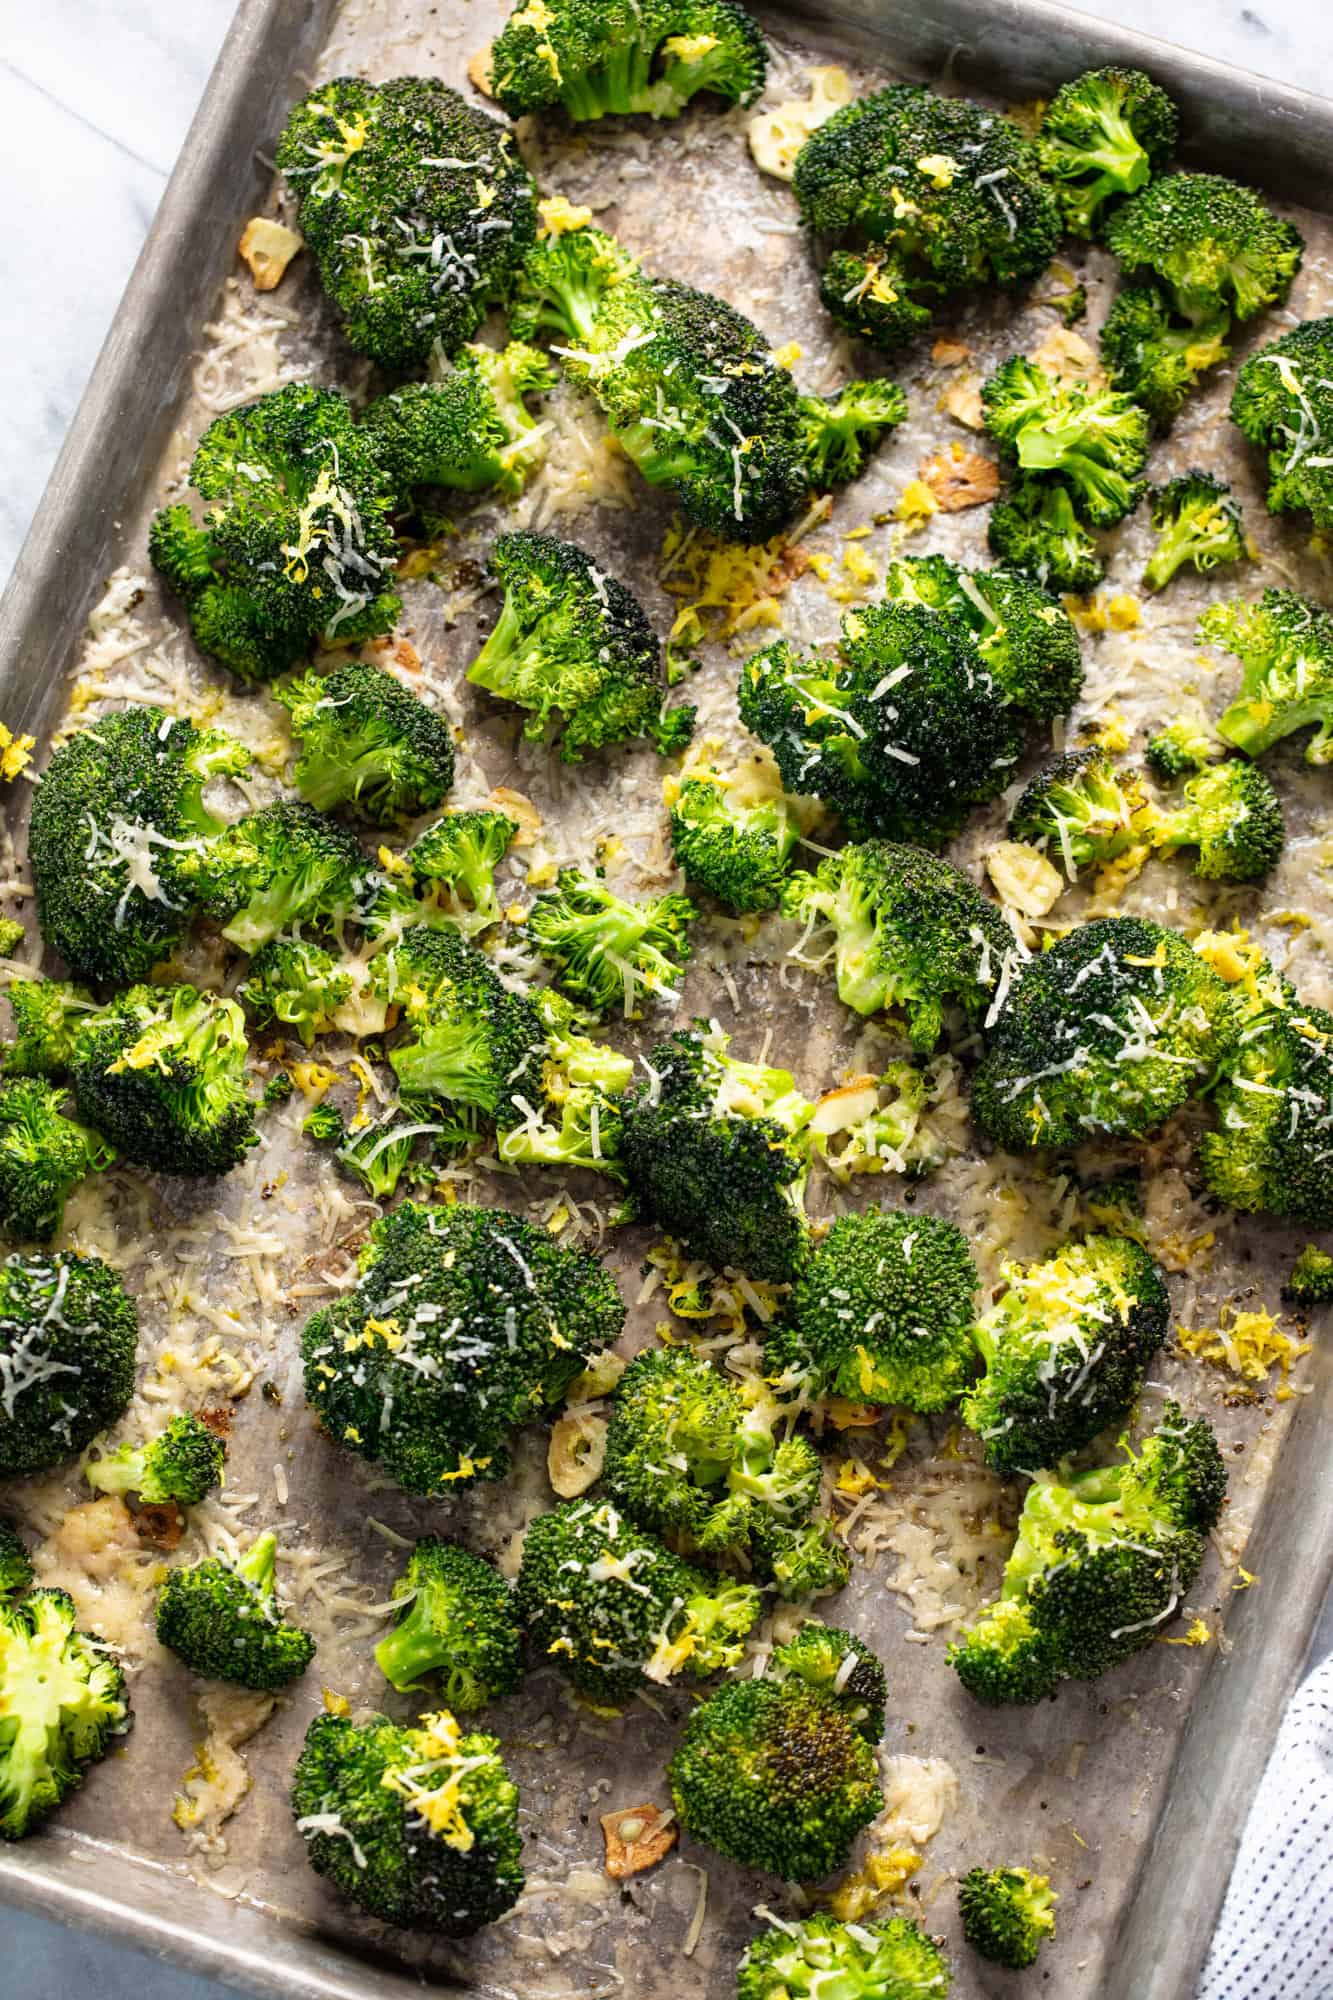 Overhead view of broccoli on a baking sheet.